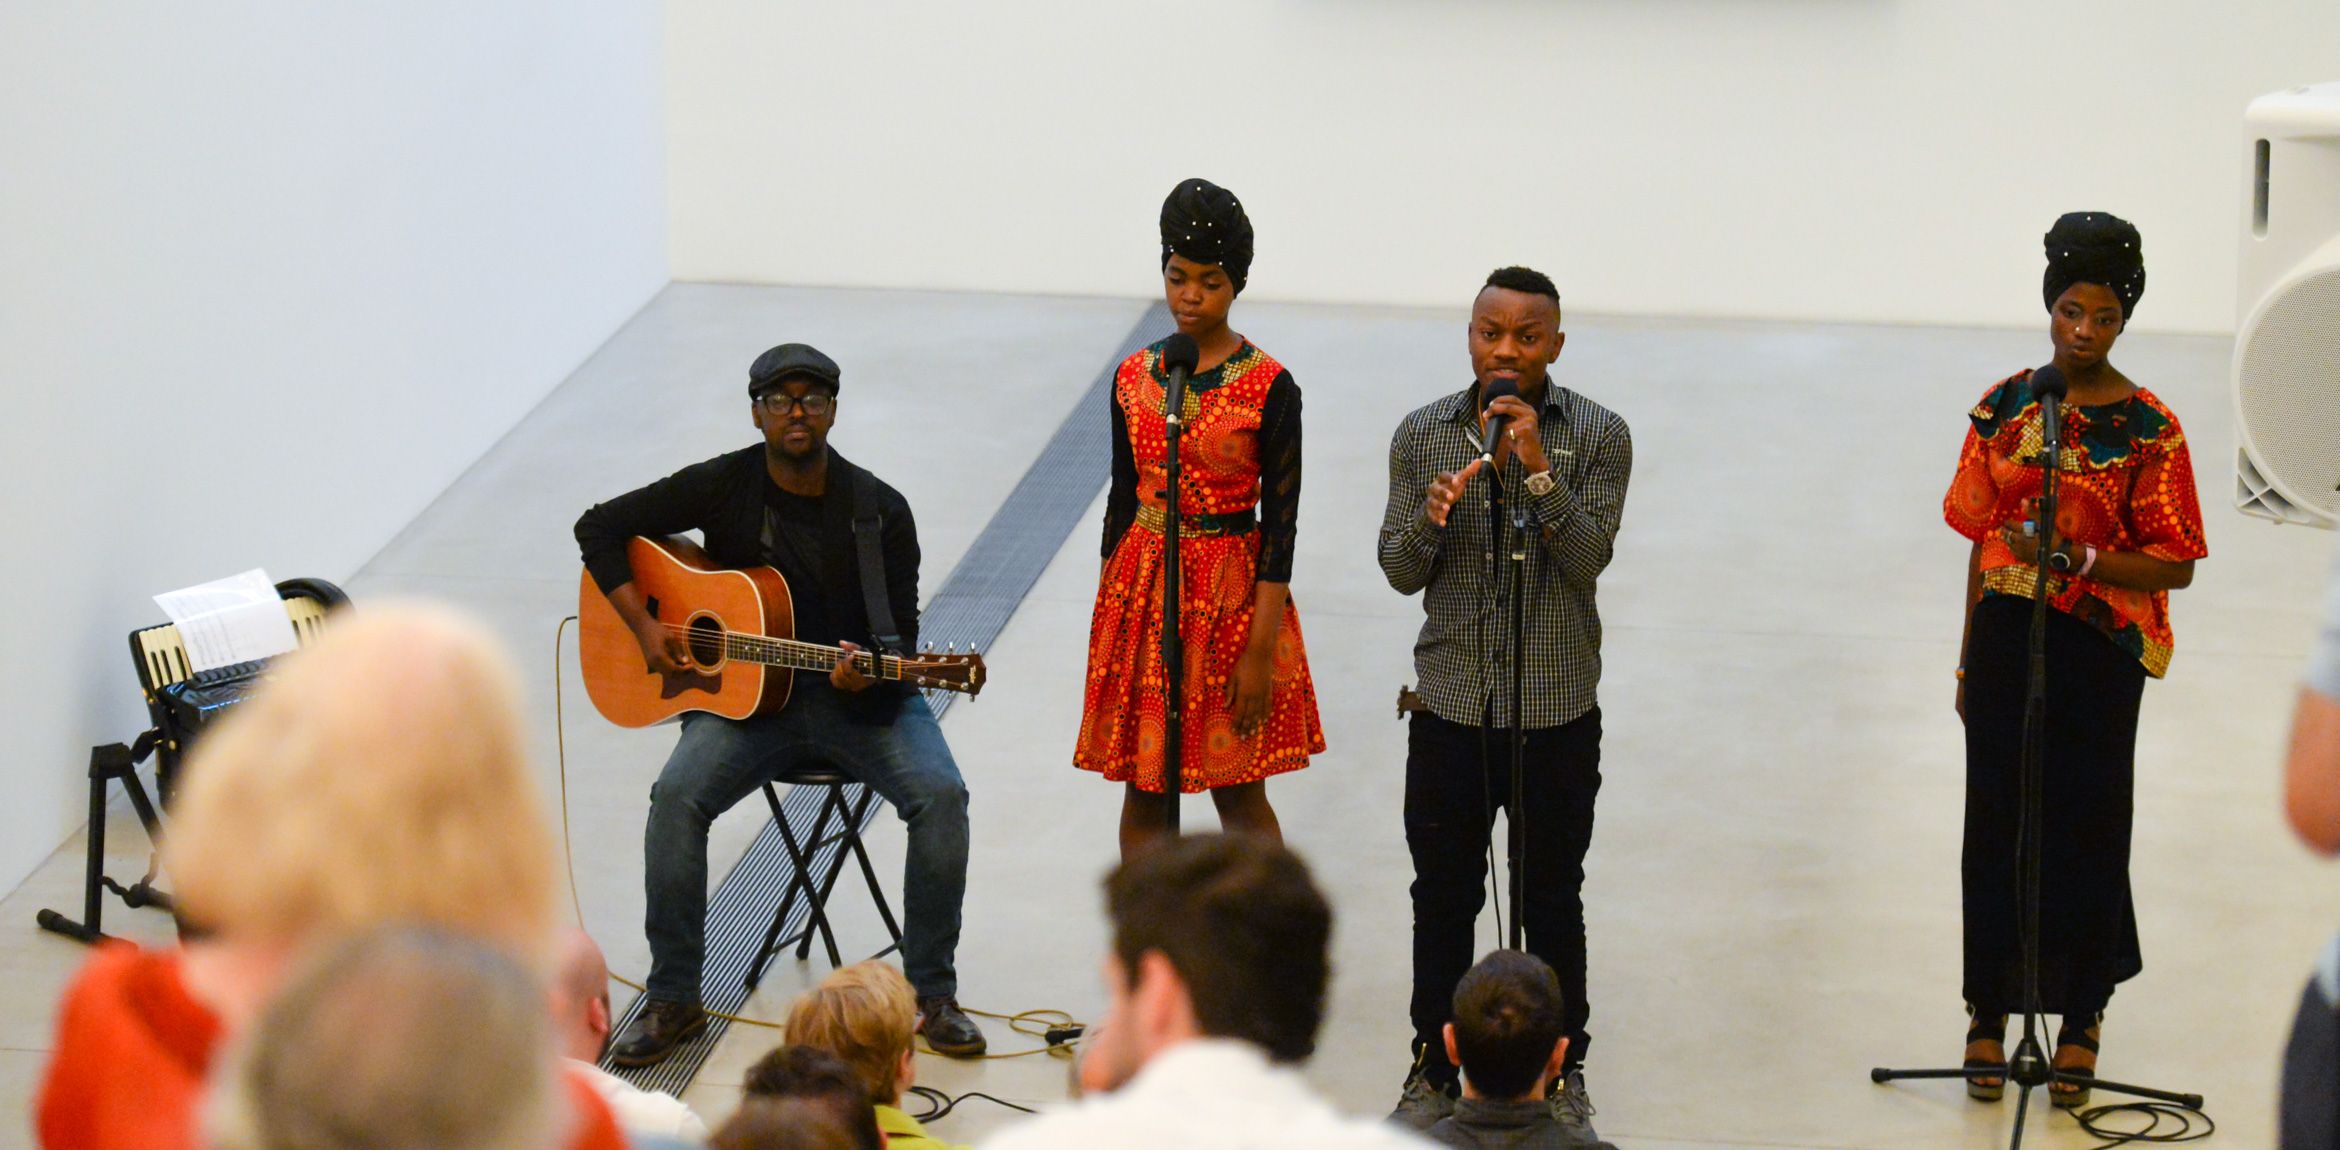 Wise Forever performs in the Lower Main Gallery for an audience on the Main Staircase.